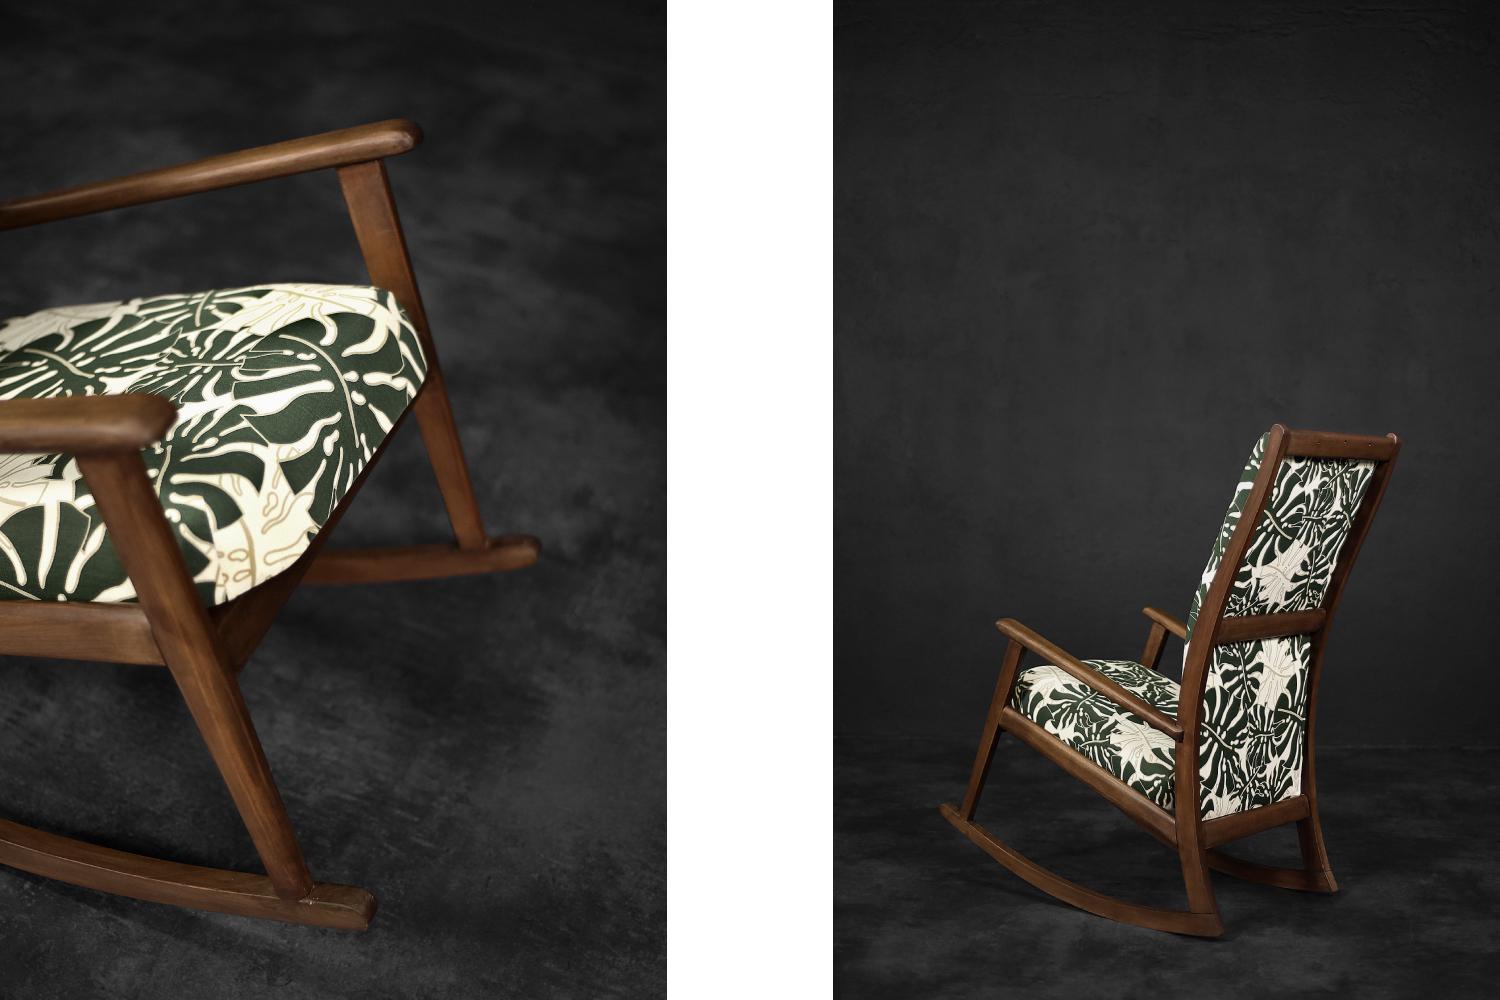 Vintage Danish Modern Rocking Chair in Wood and Monstera Leaf Pattern Fabric In Good Condition For Sale In Warszawa, Mazowieckie